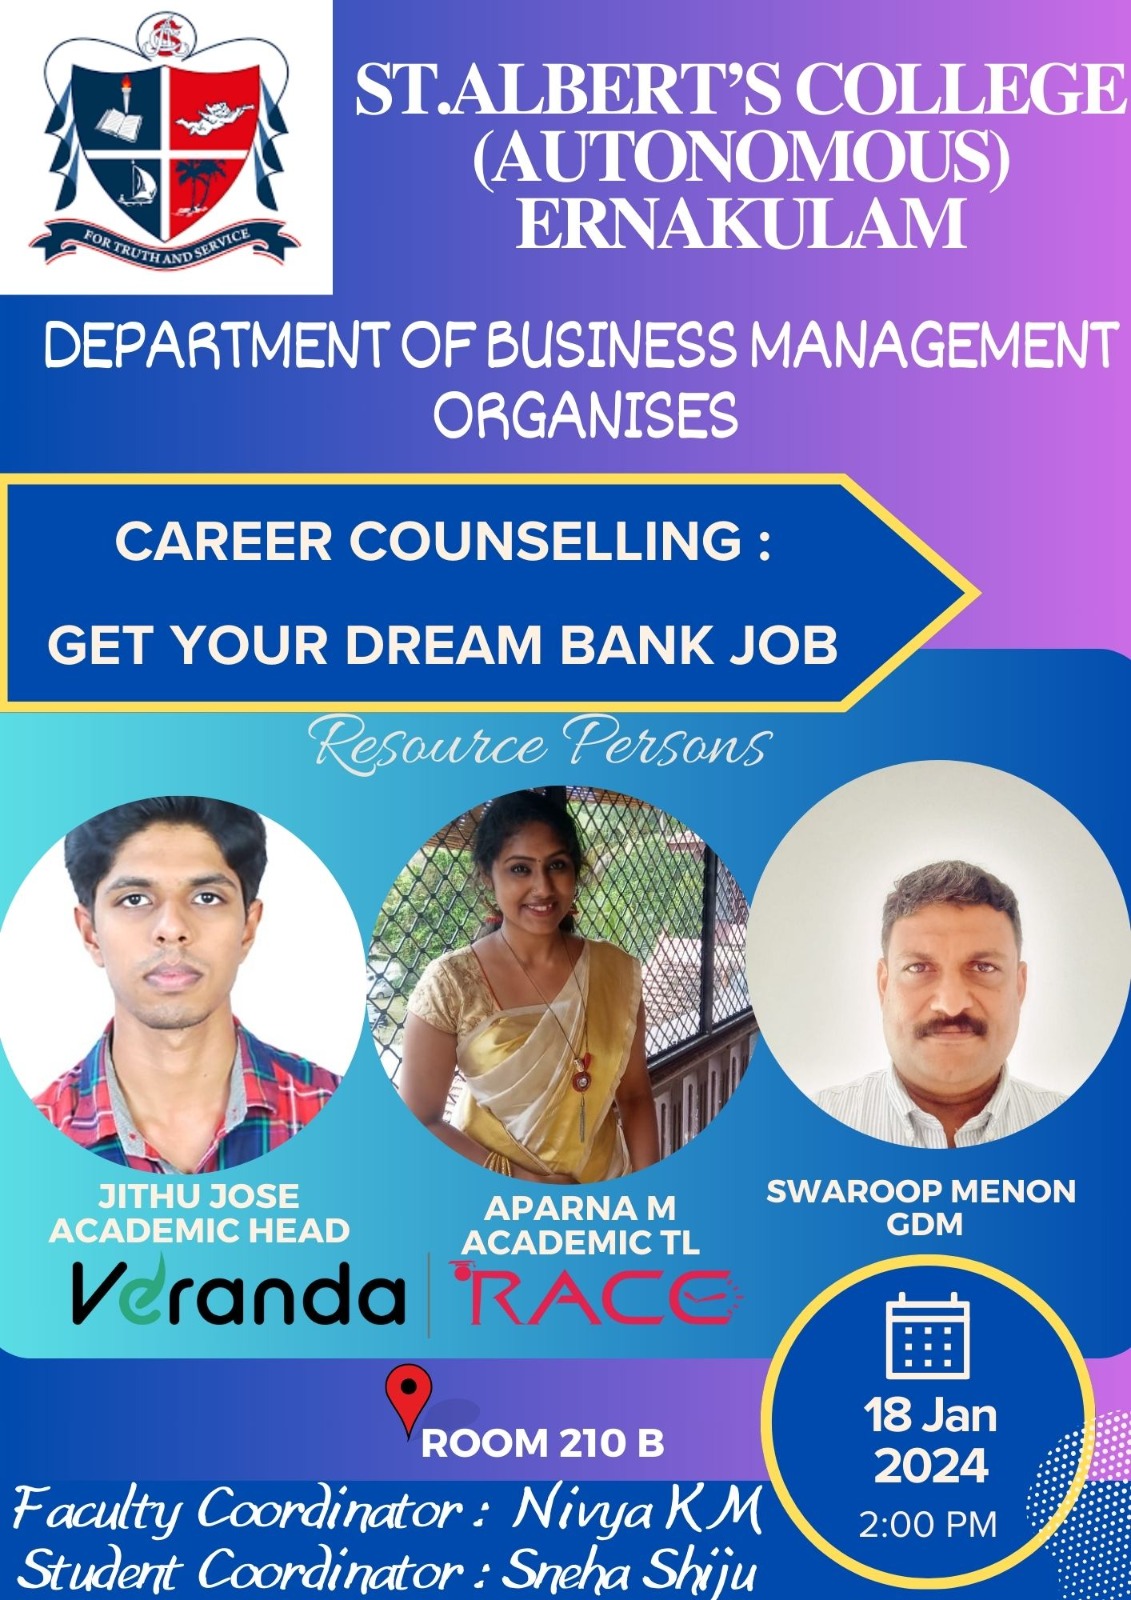 CAREER COUNSELLING GET YOUR DREAM BANK JOB